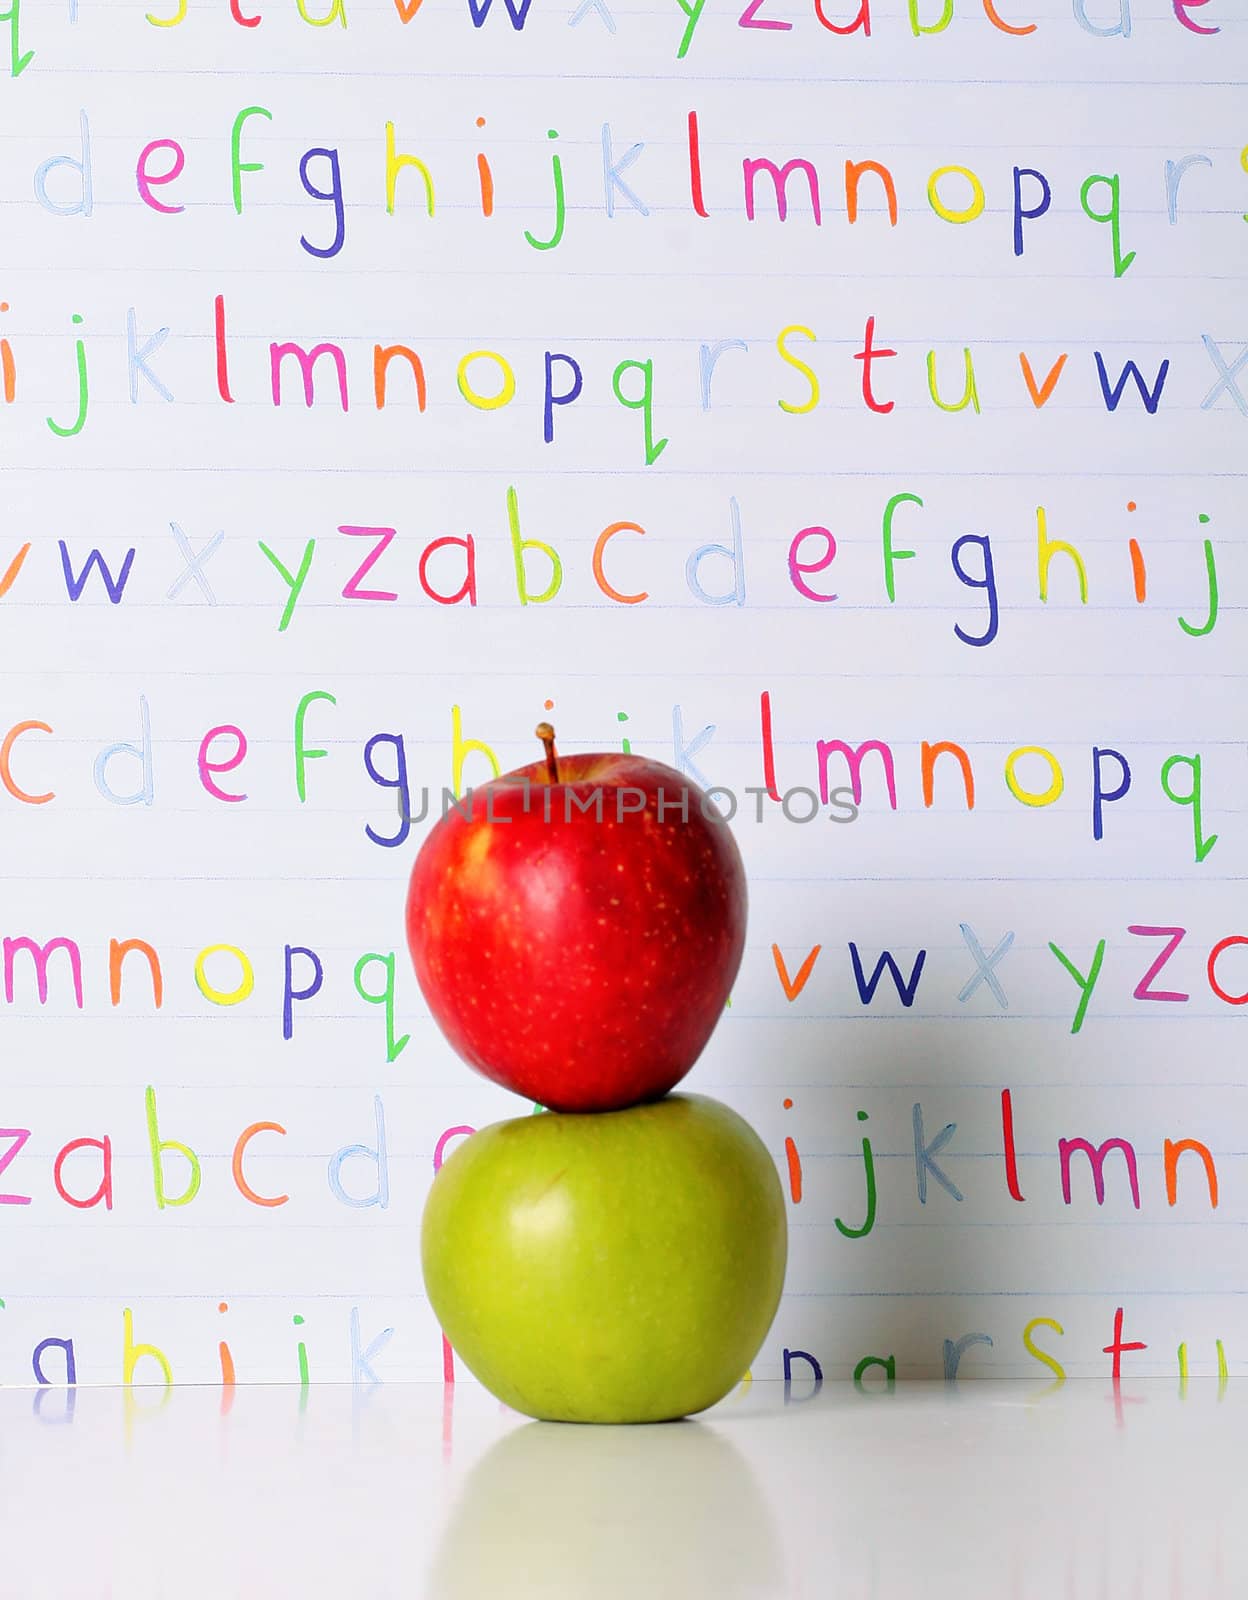 shot of ABC Apples by creativestock